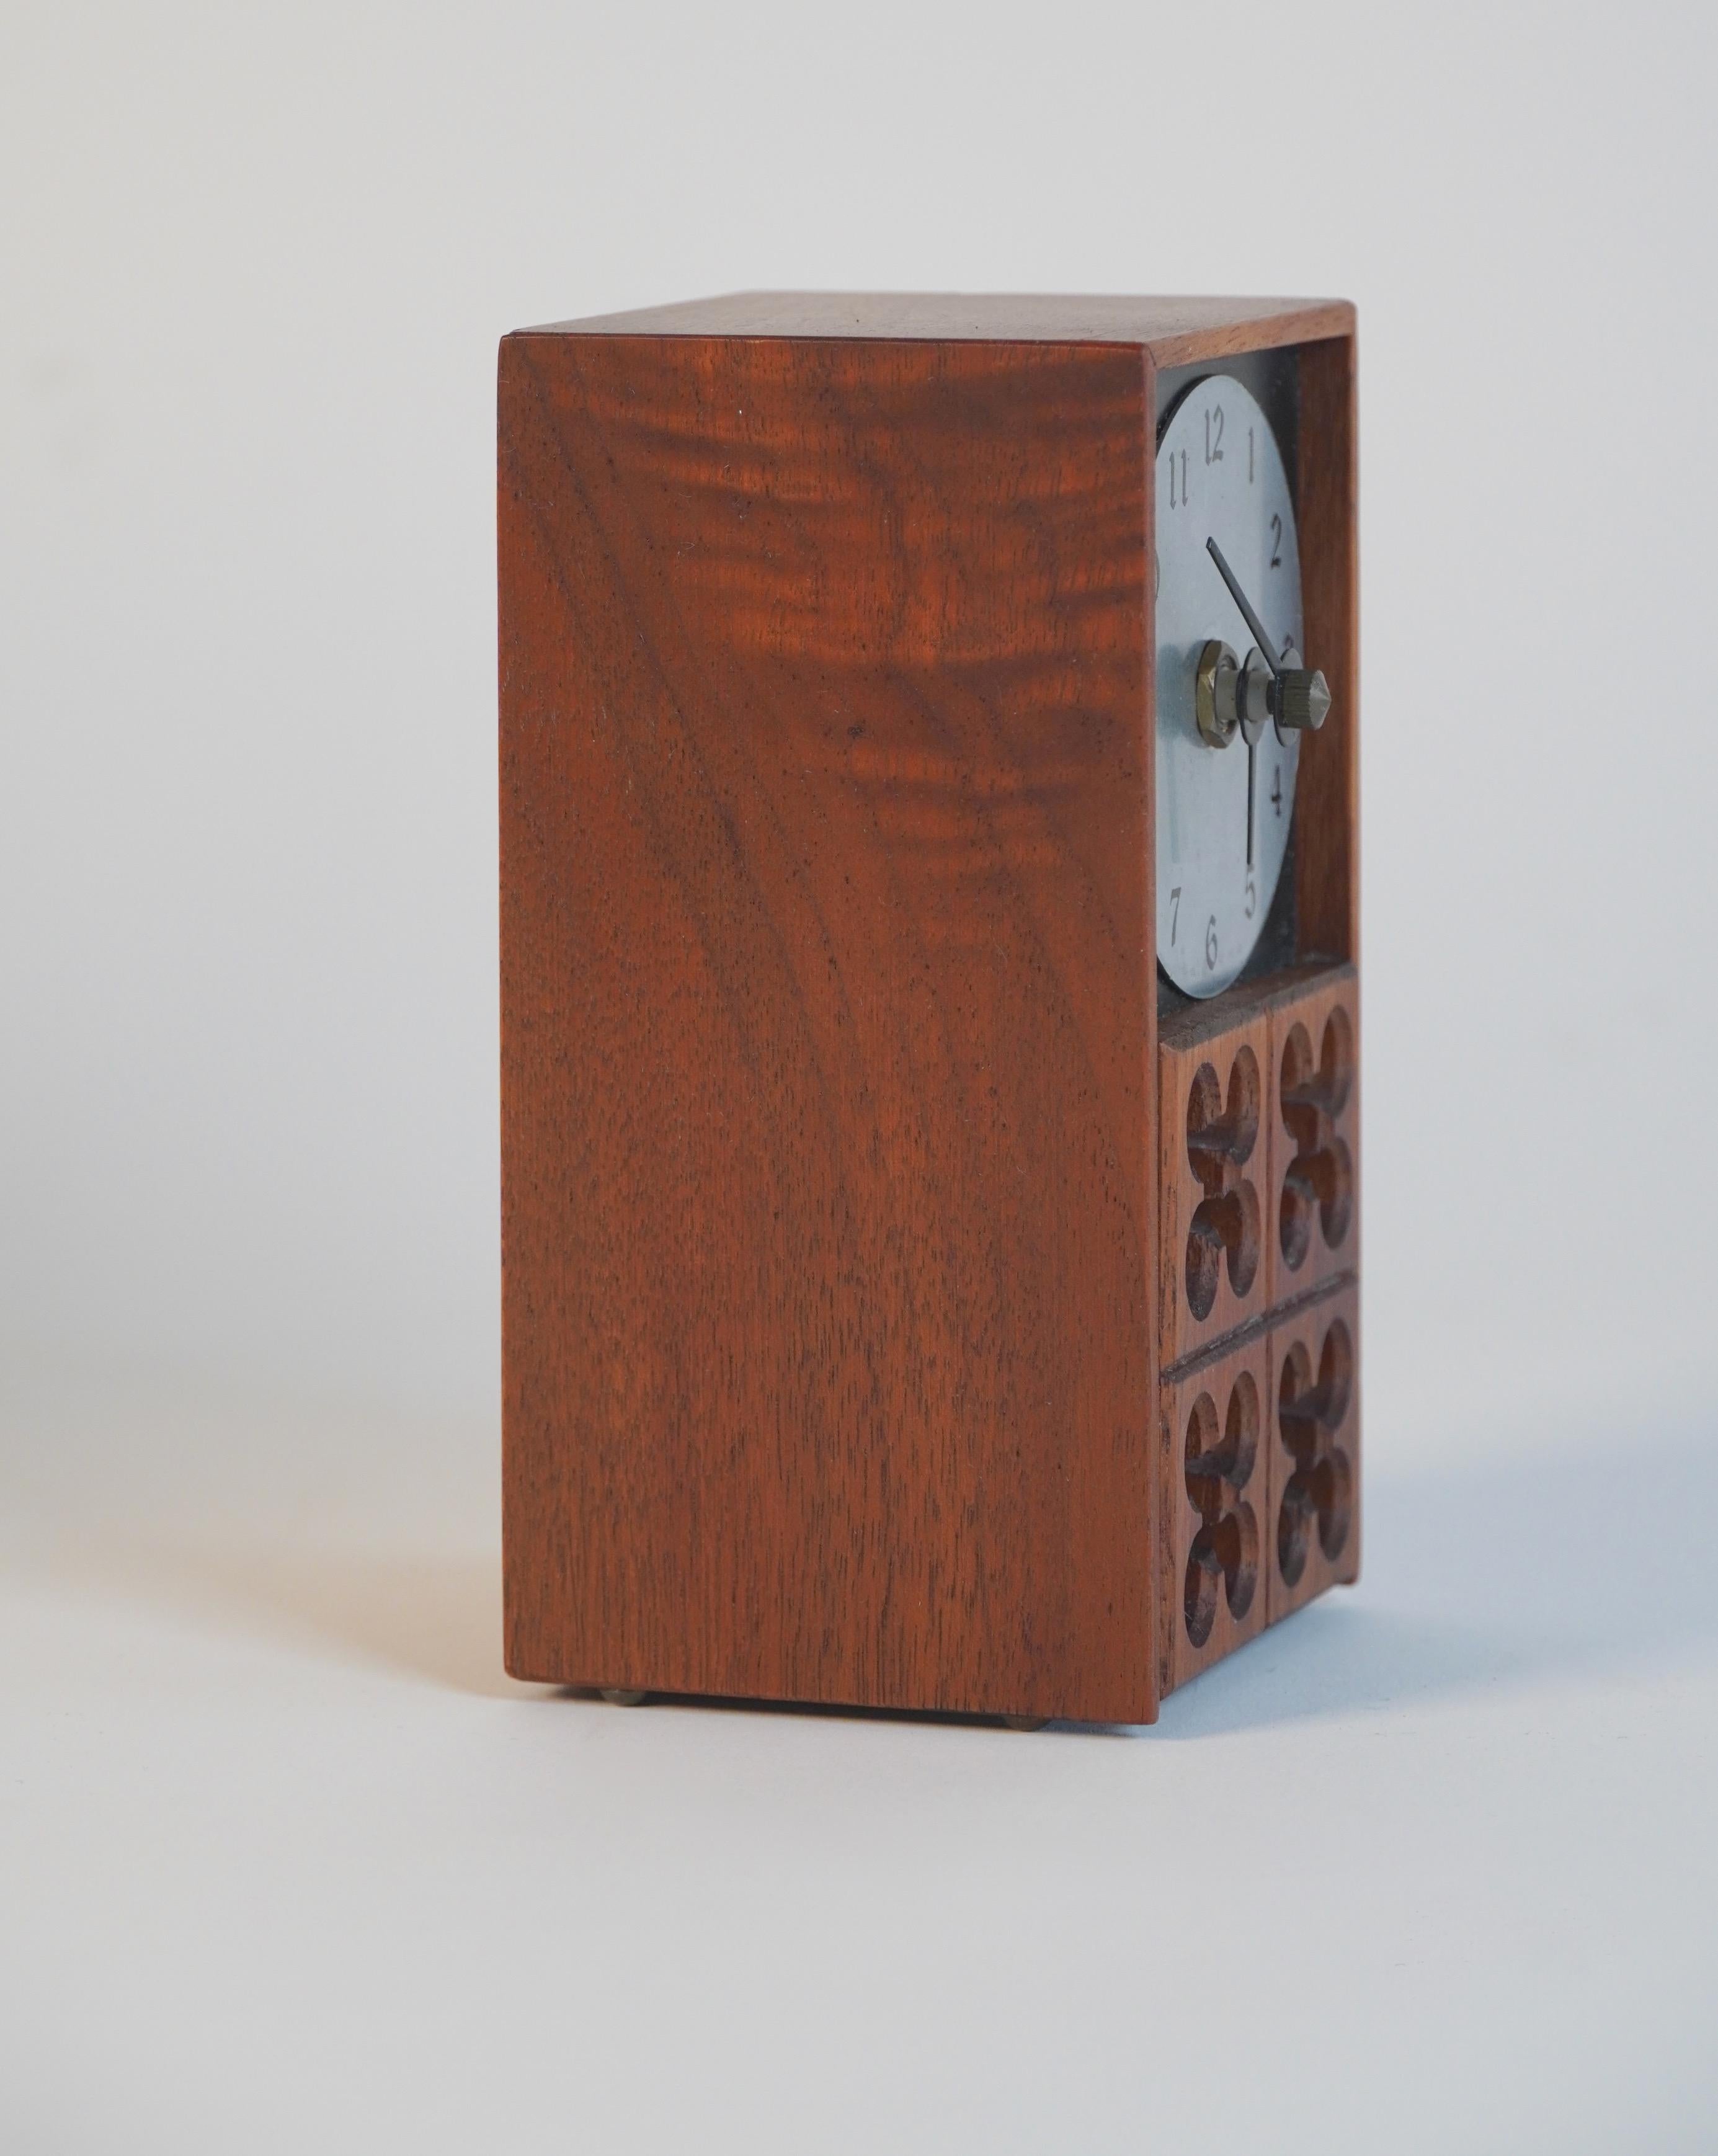 Petite desk clock by industrial designer Arthur Umanoff for the Howard Miller clock company. Crafted of walnut and aluminum with his trademark five circle pattern motif on the front of the clock. With a sliding back to access the movement for